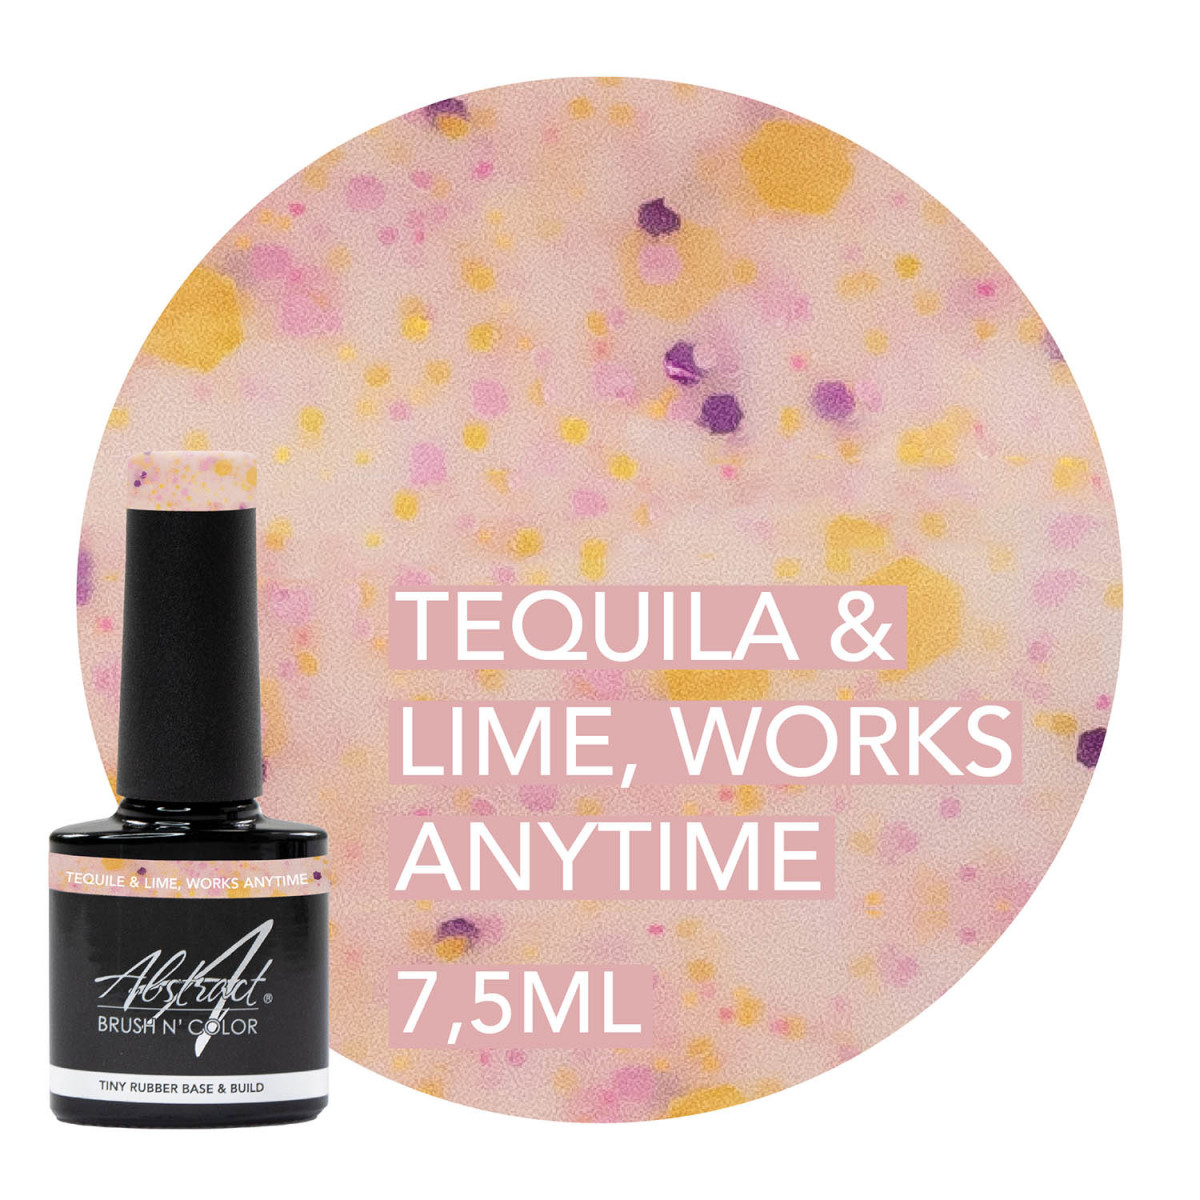 PRE-ORDER Tequila and Lime works anytime - TINY Rubber Base & Build Gel Abstract